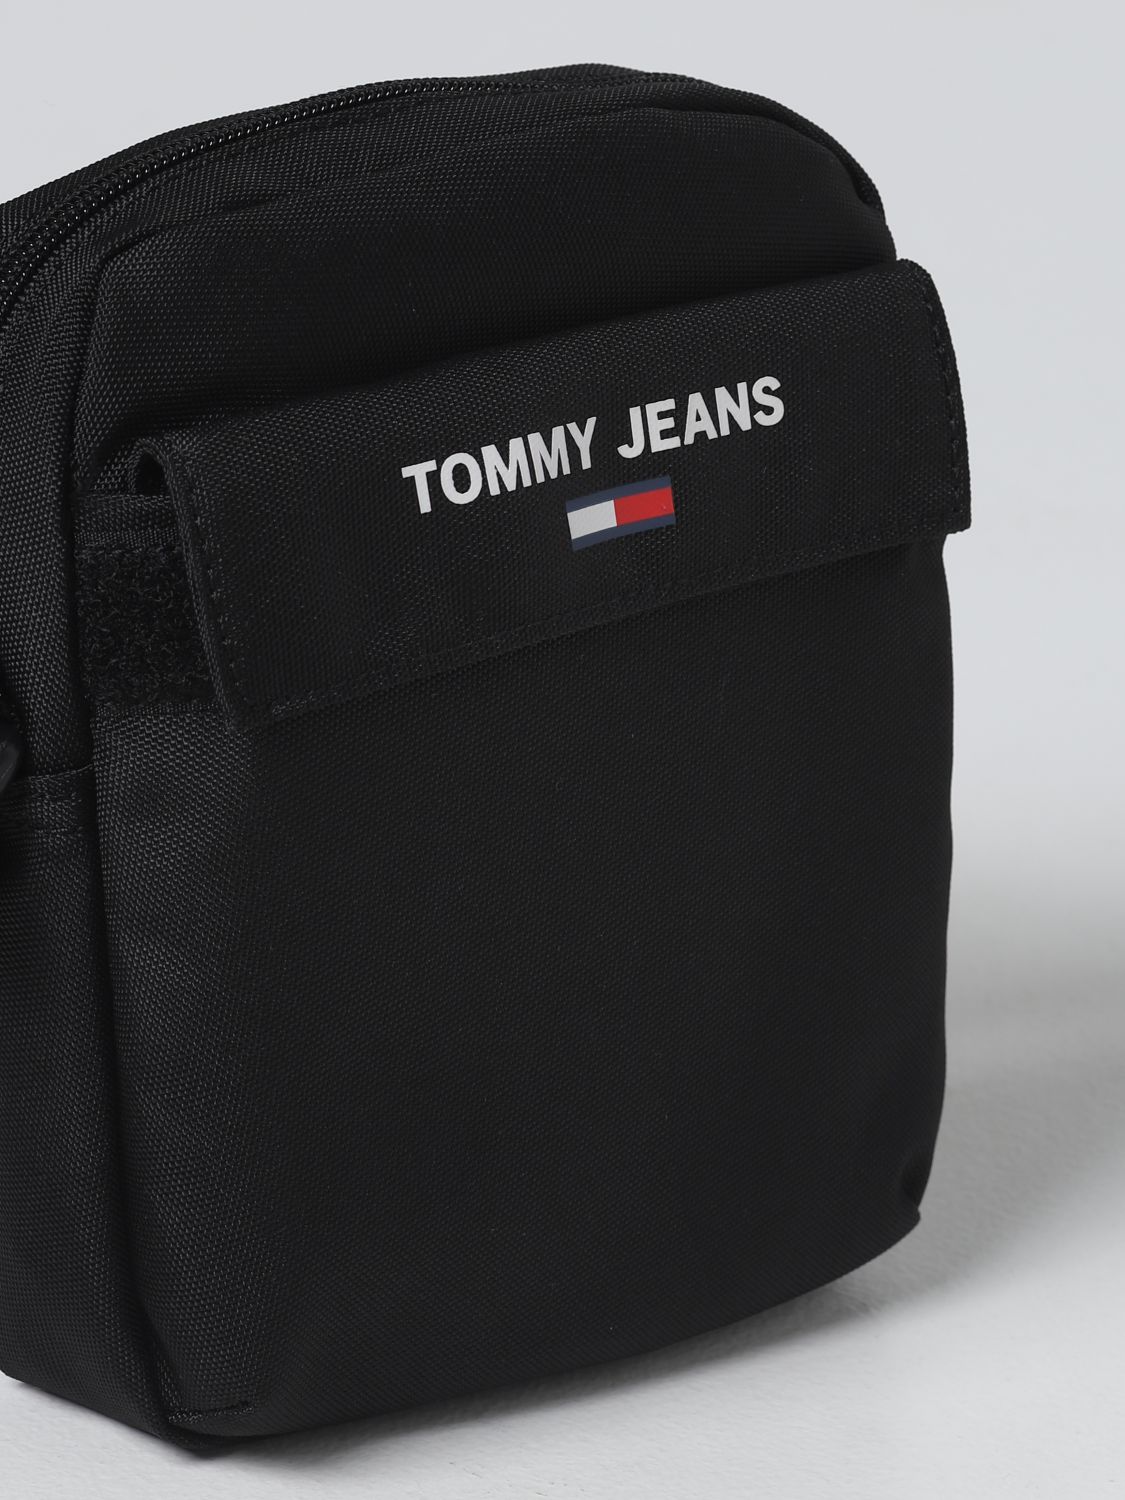 Sacoche Tommy Jeans: Sacoche Tommy Jeans homme noir 3